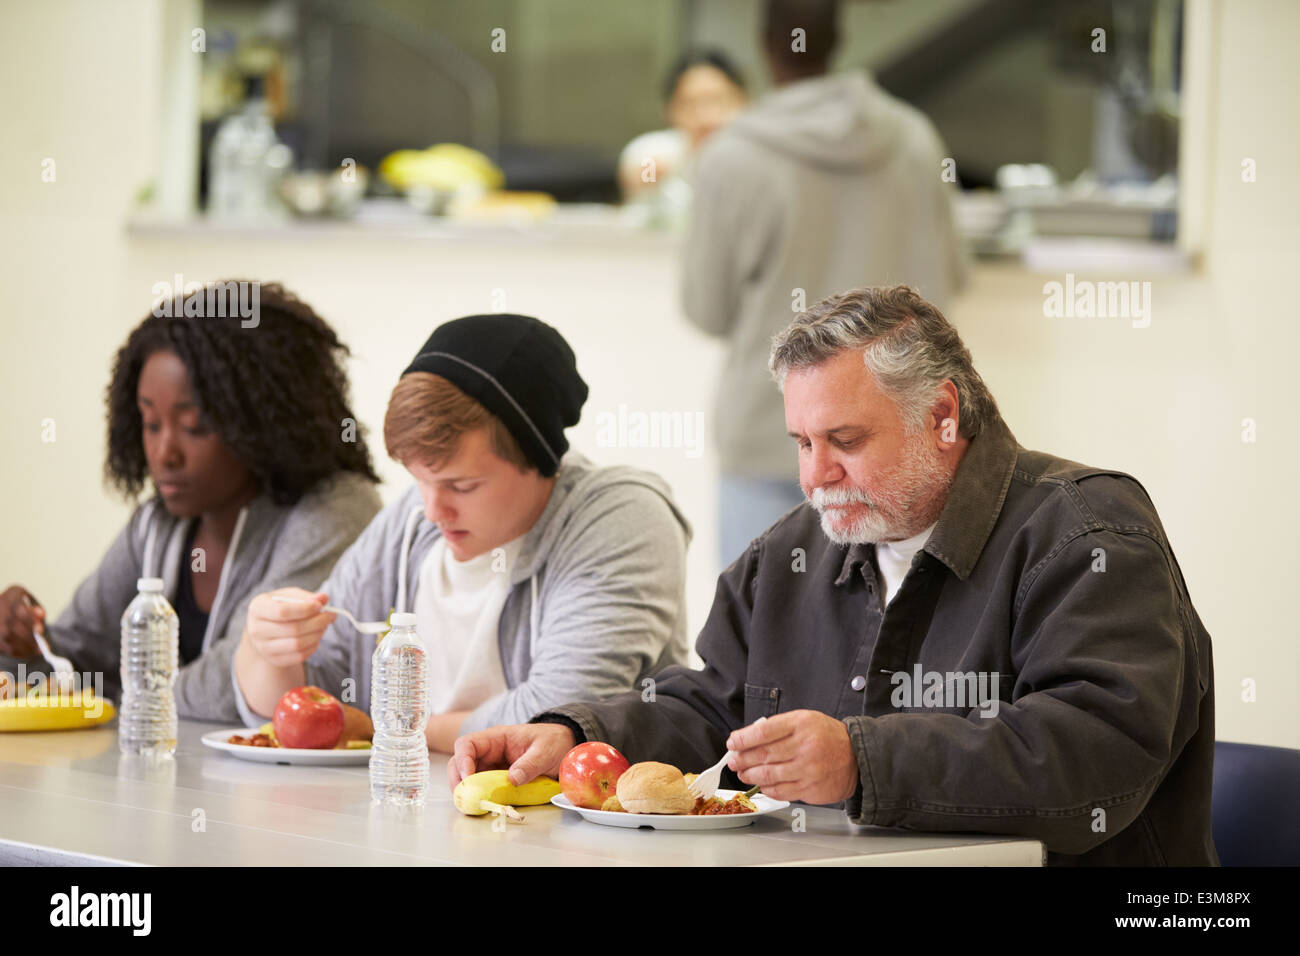 People Sitting At Table Eating Food In Homeless Shelter Stock Photo